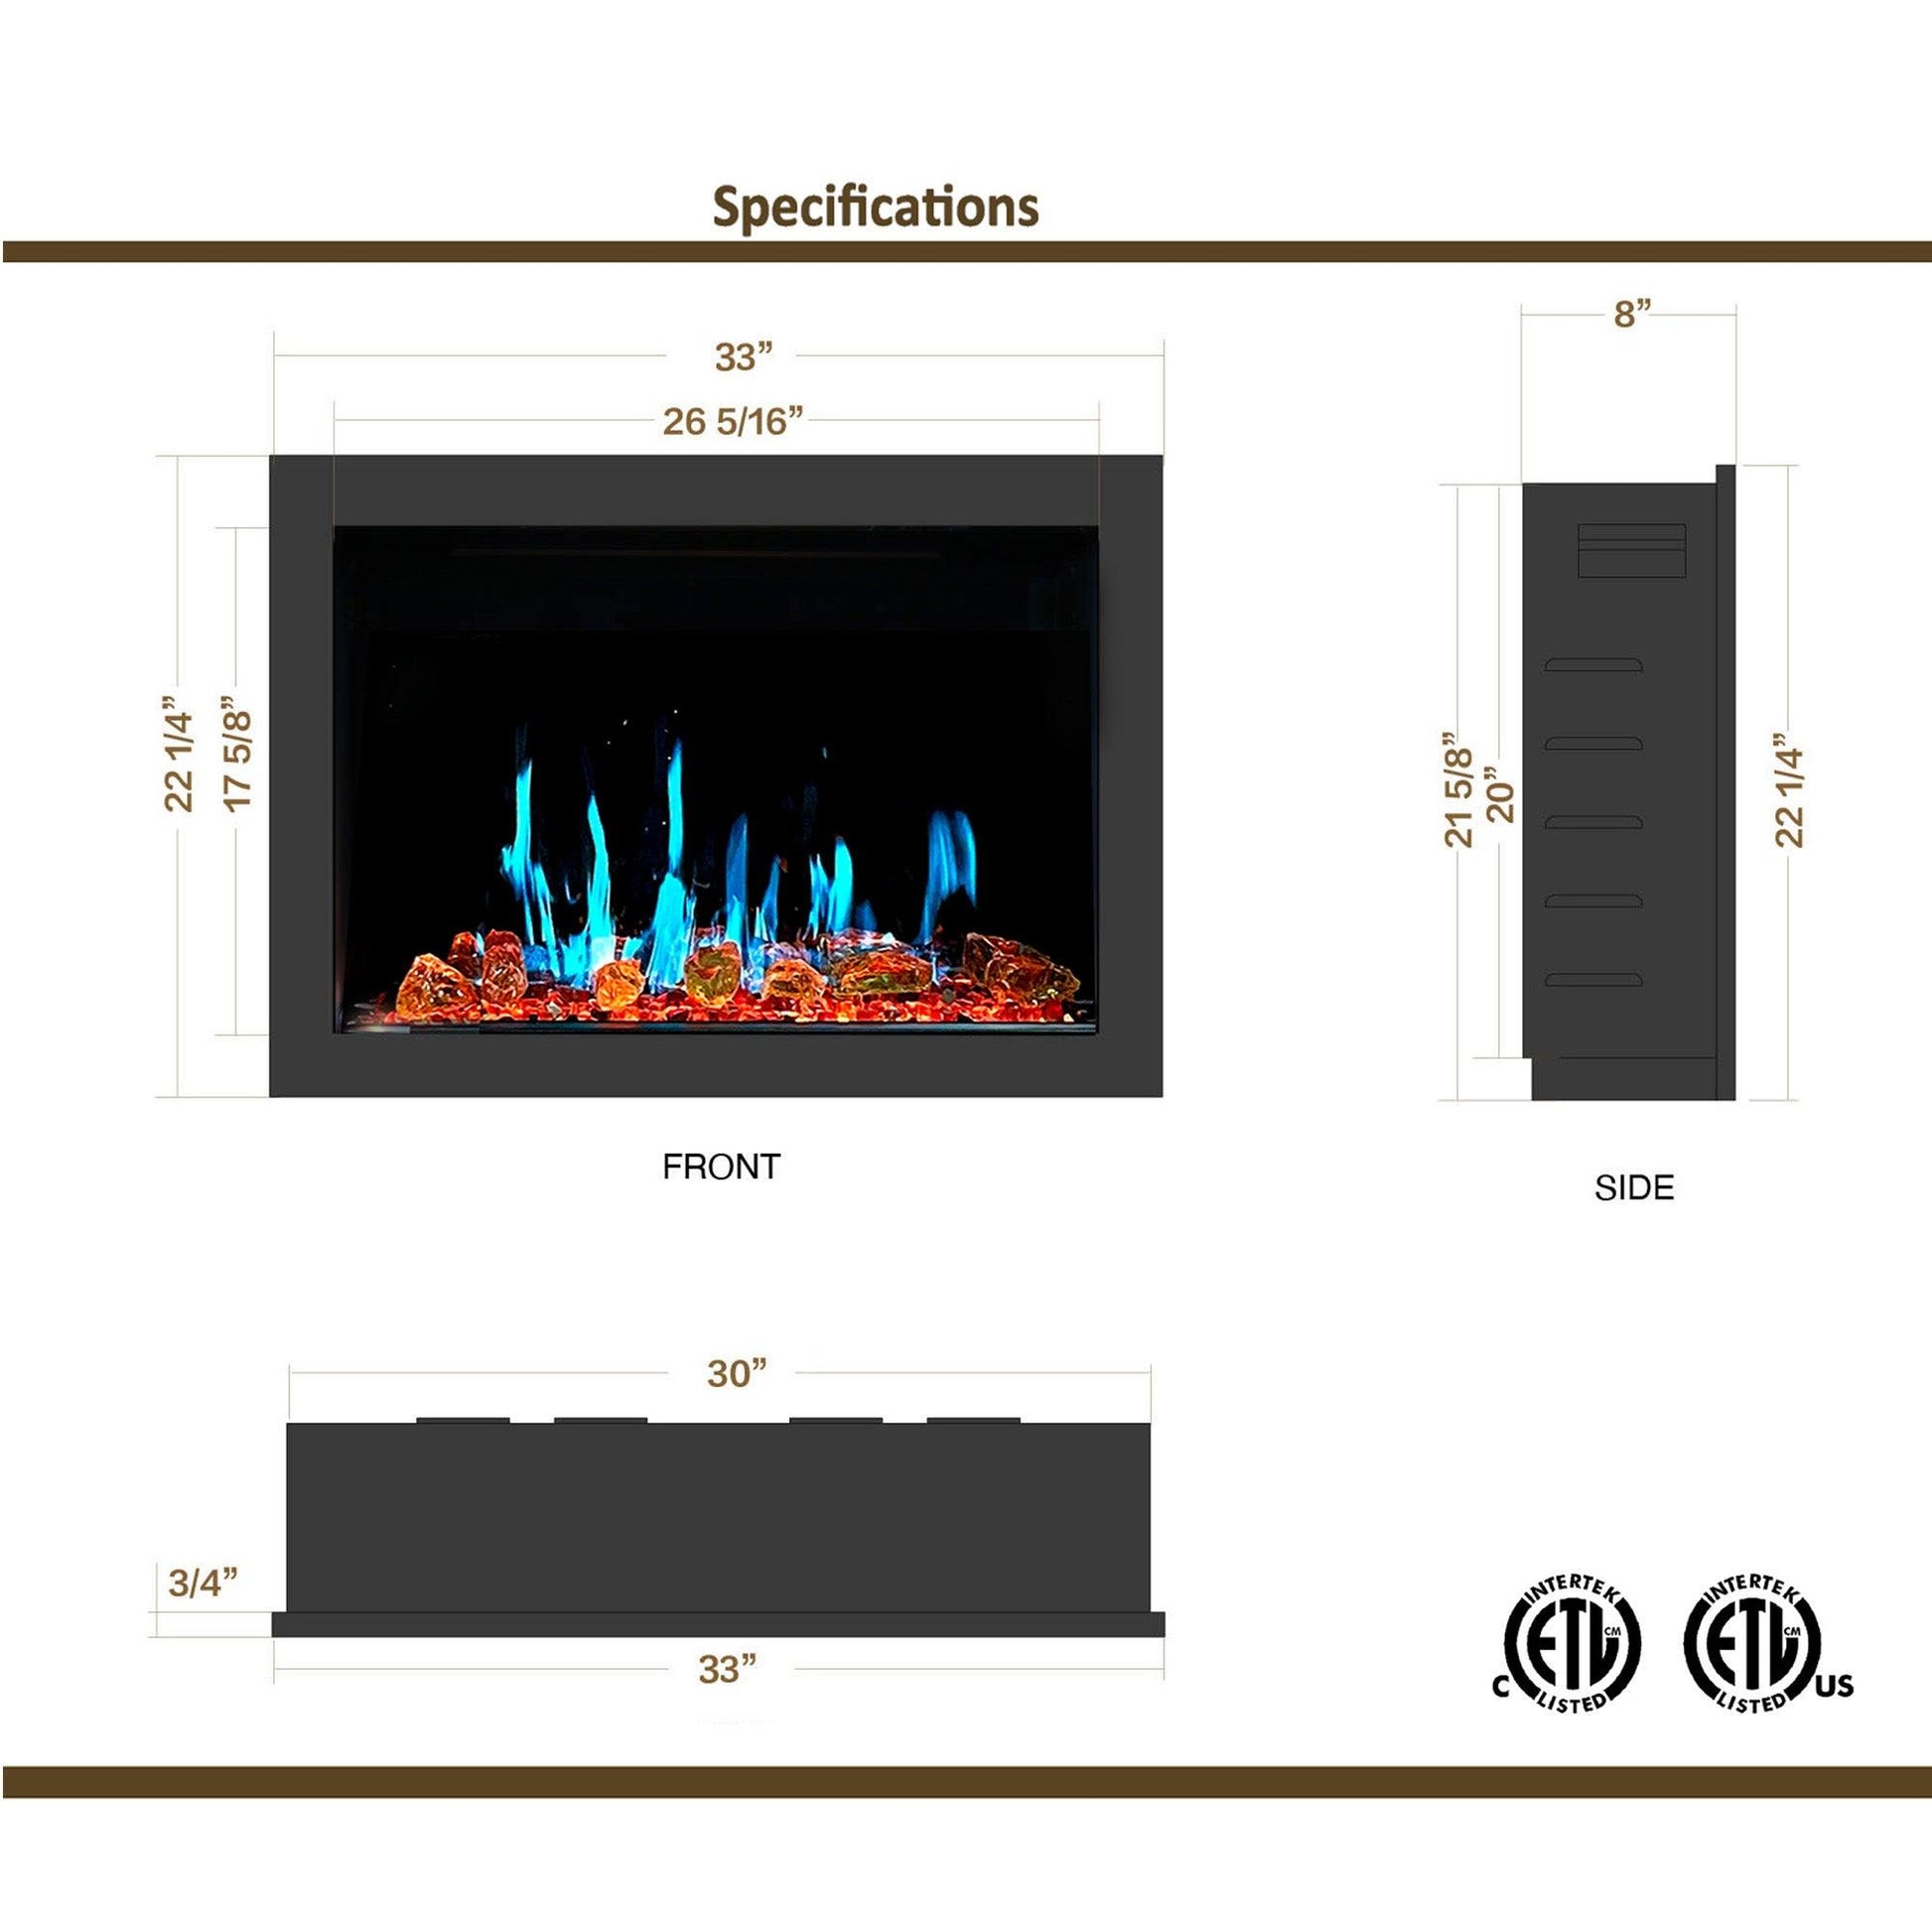 ZopaFlame™ 33" Smart Electric Fireplace Insert Black - BGSZP3033 - ZopaFlame Fireplaces